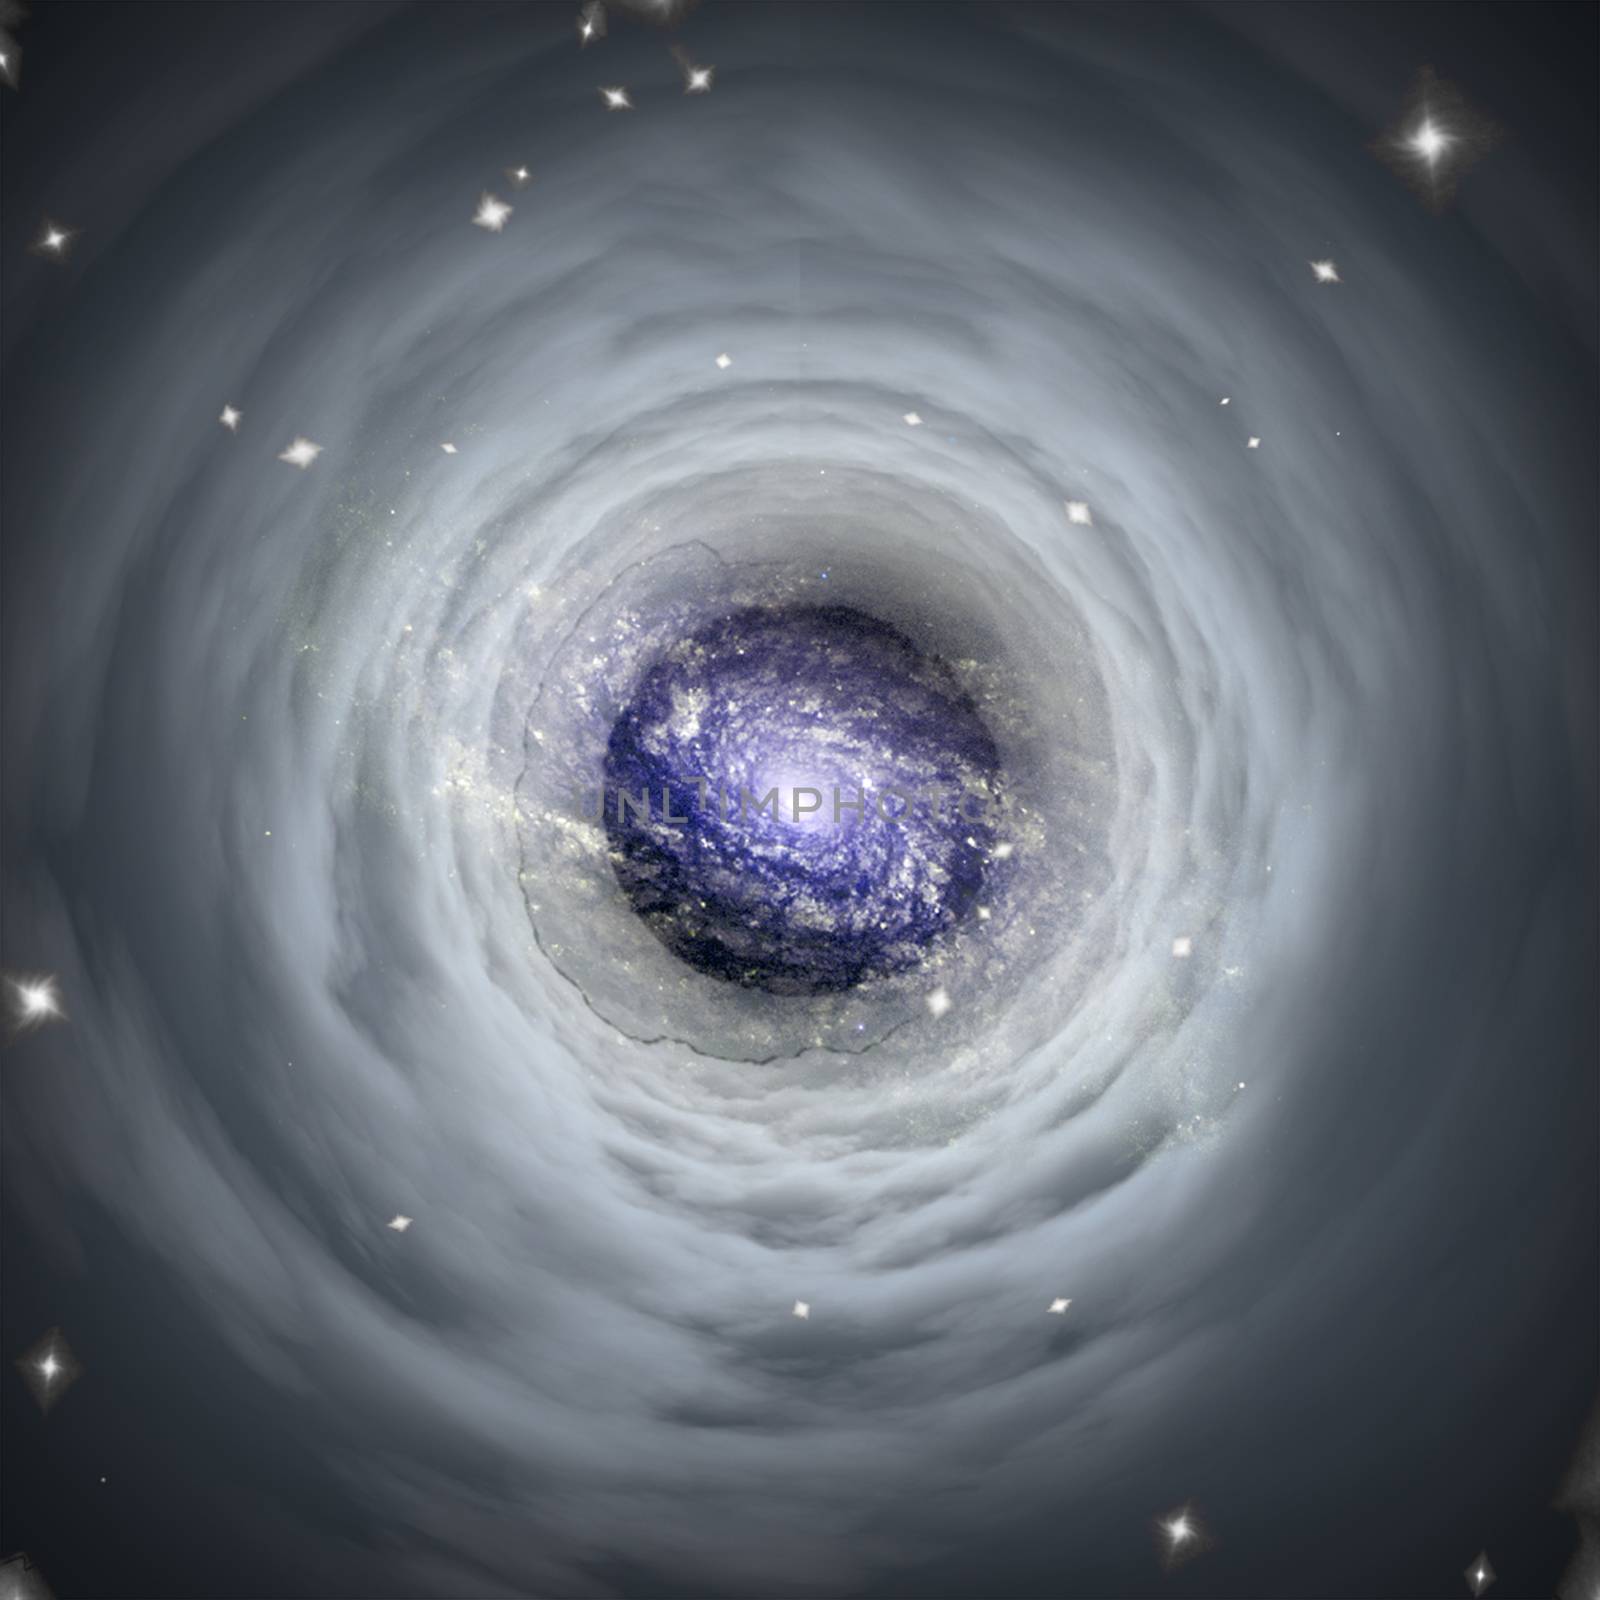 Tunnel in clouds leads to the galaxy. Some elements image credit NASA.